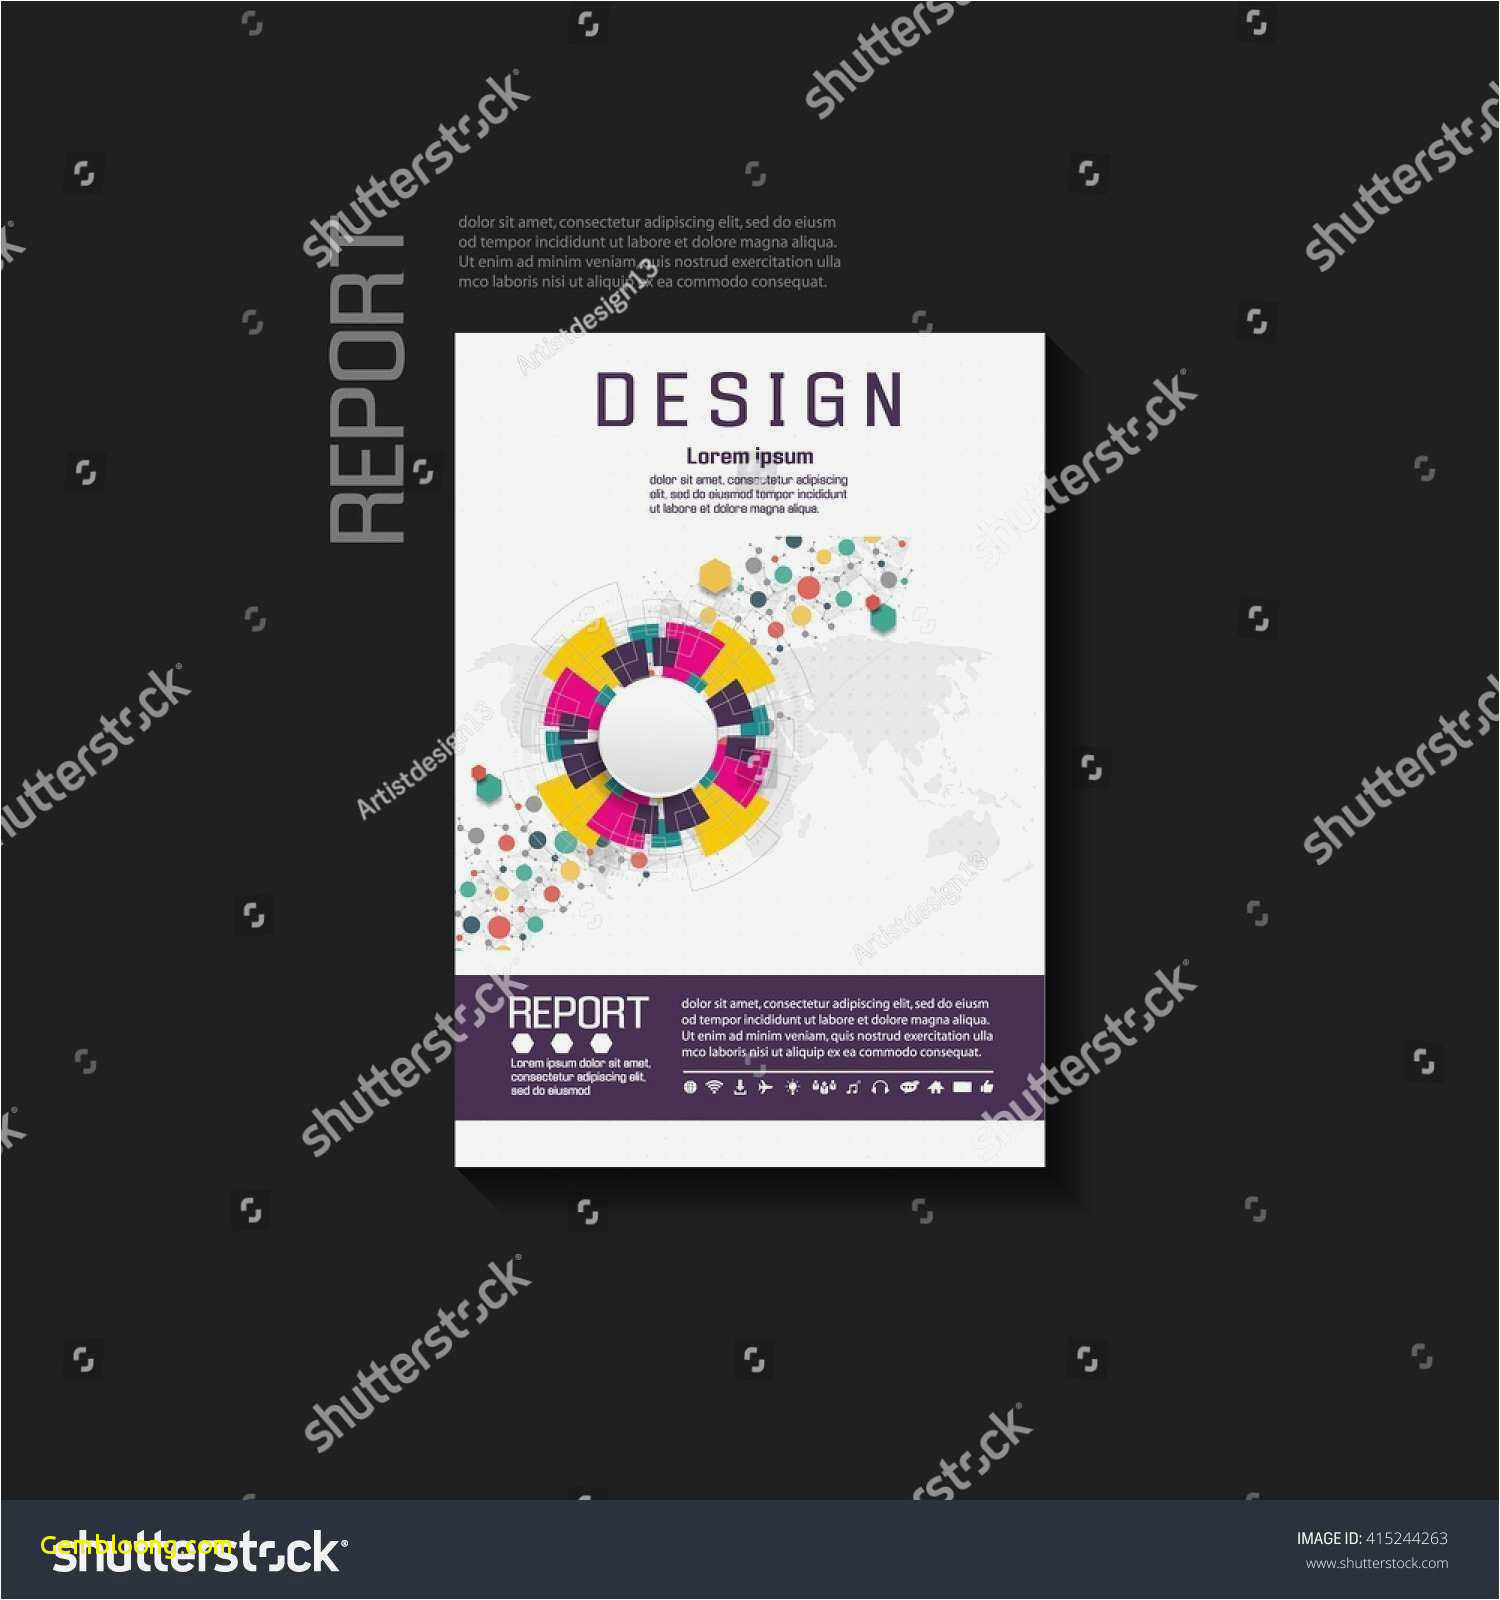 free business card psd templates valid business card shop template luxury free adobe illustrator templates of free adobe illustrator templates